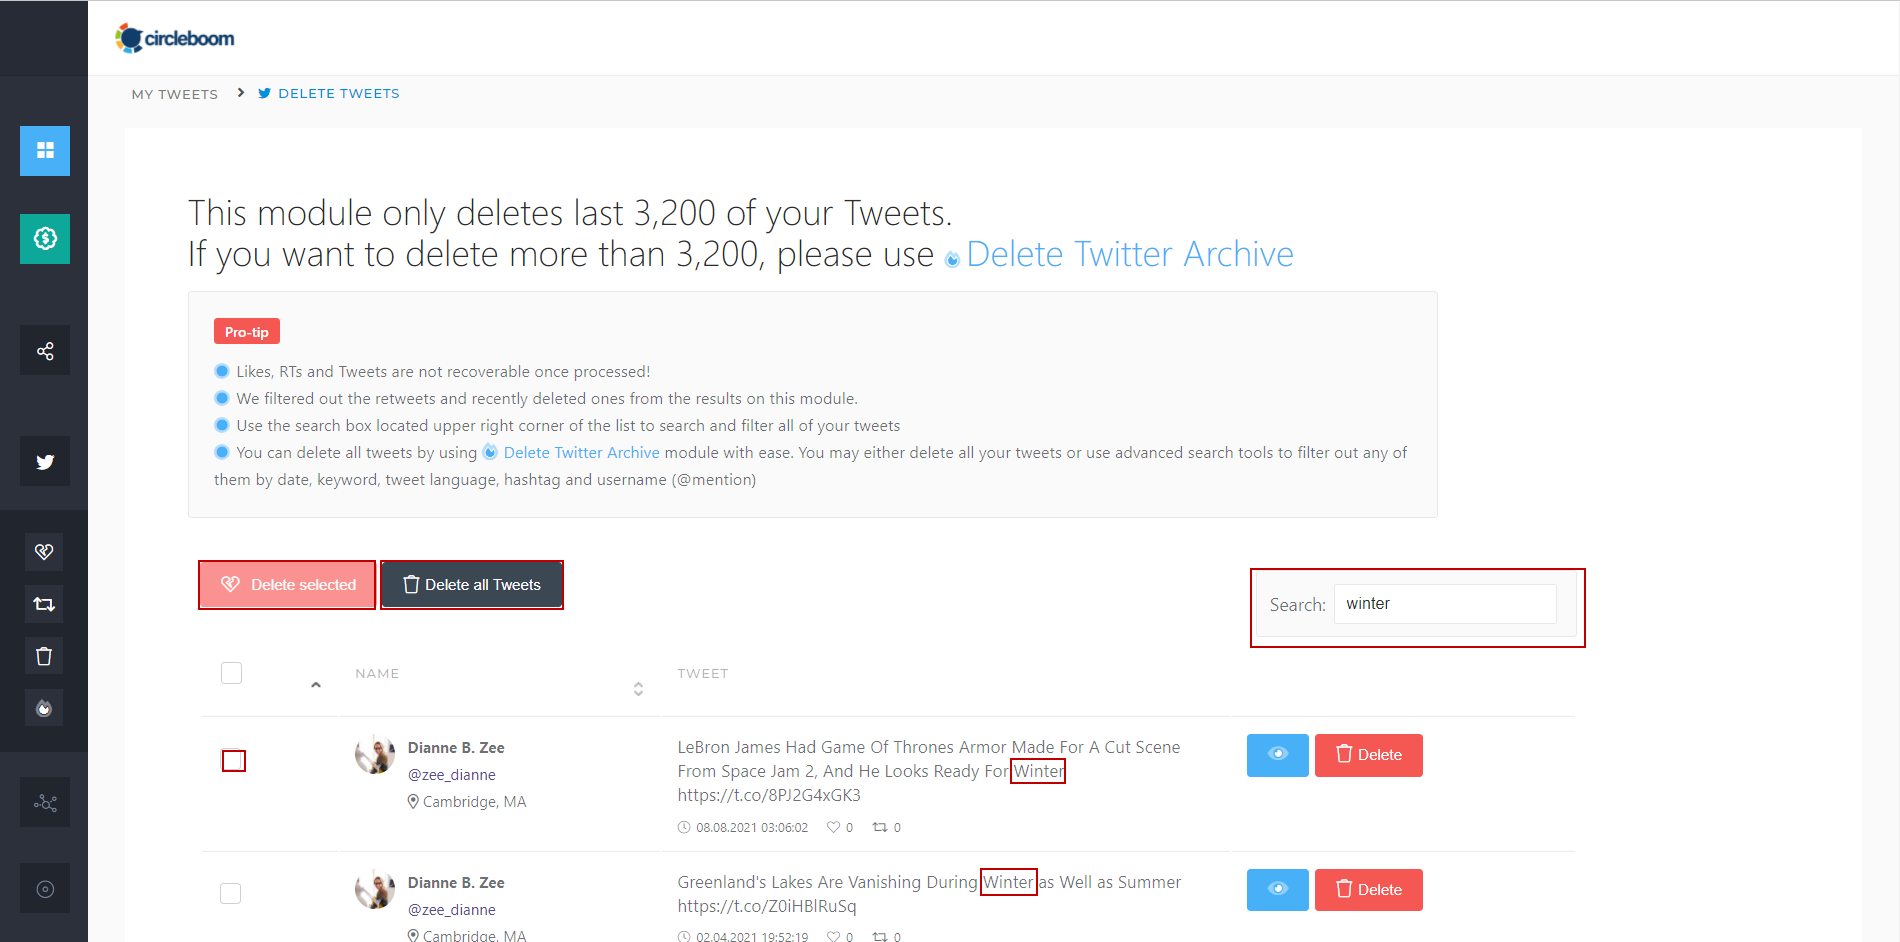 Either selected them manually or mass delete tweets by keywords, clean your Twitter history as you like!